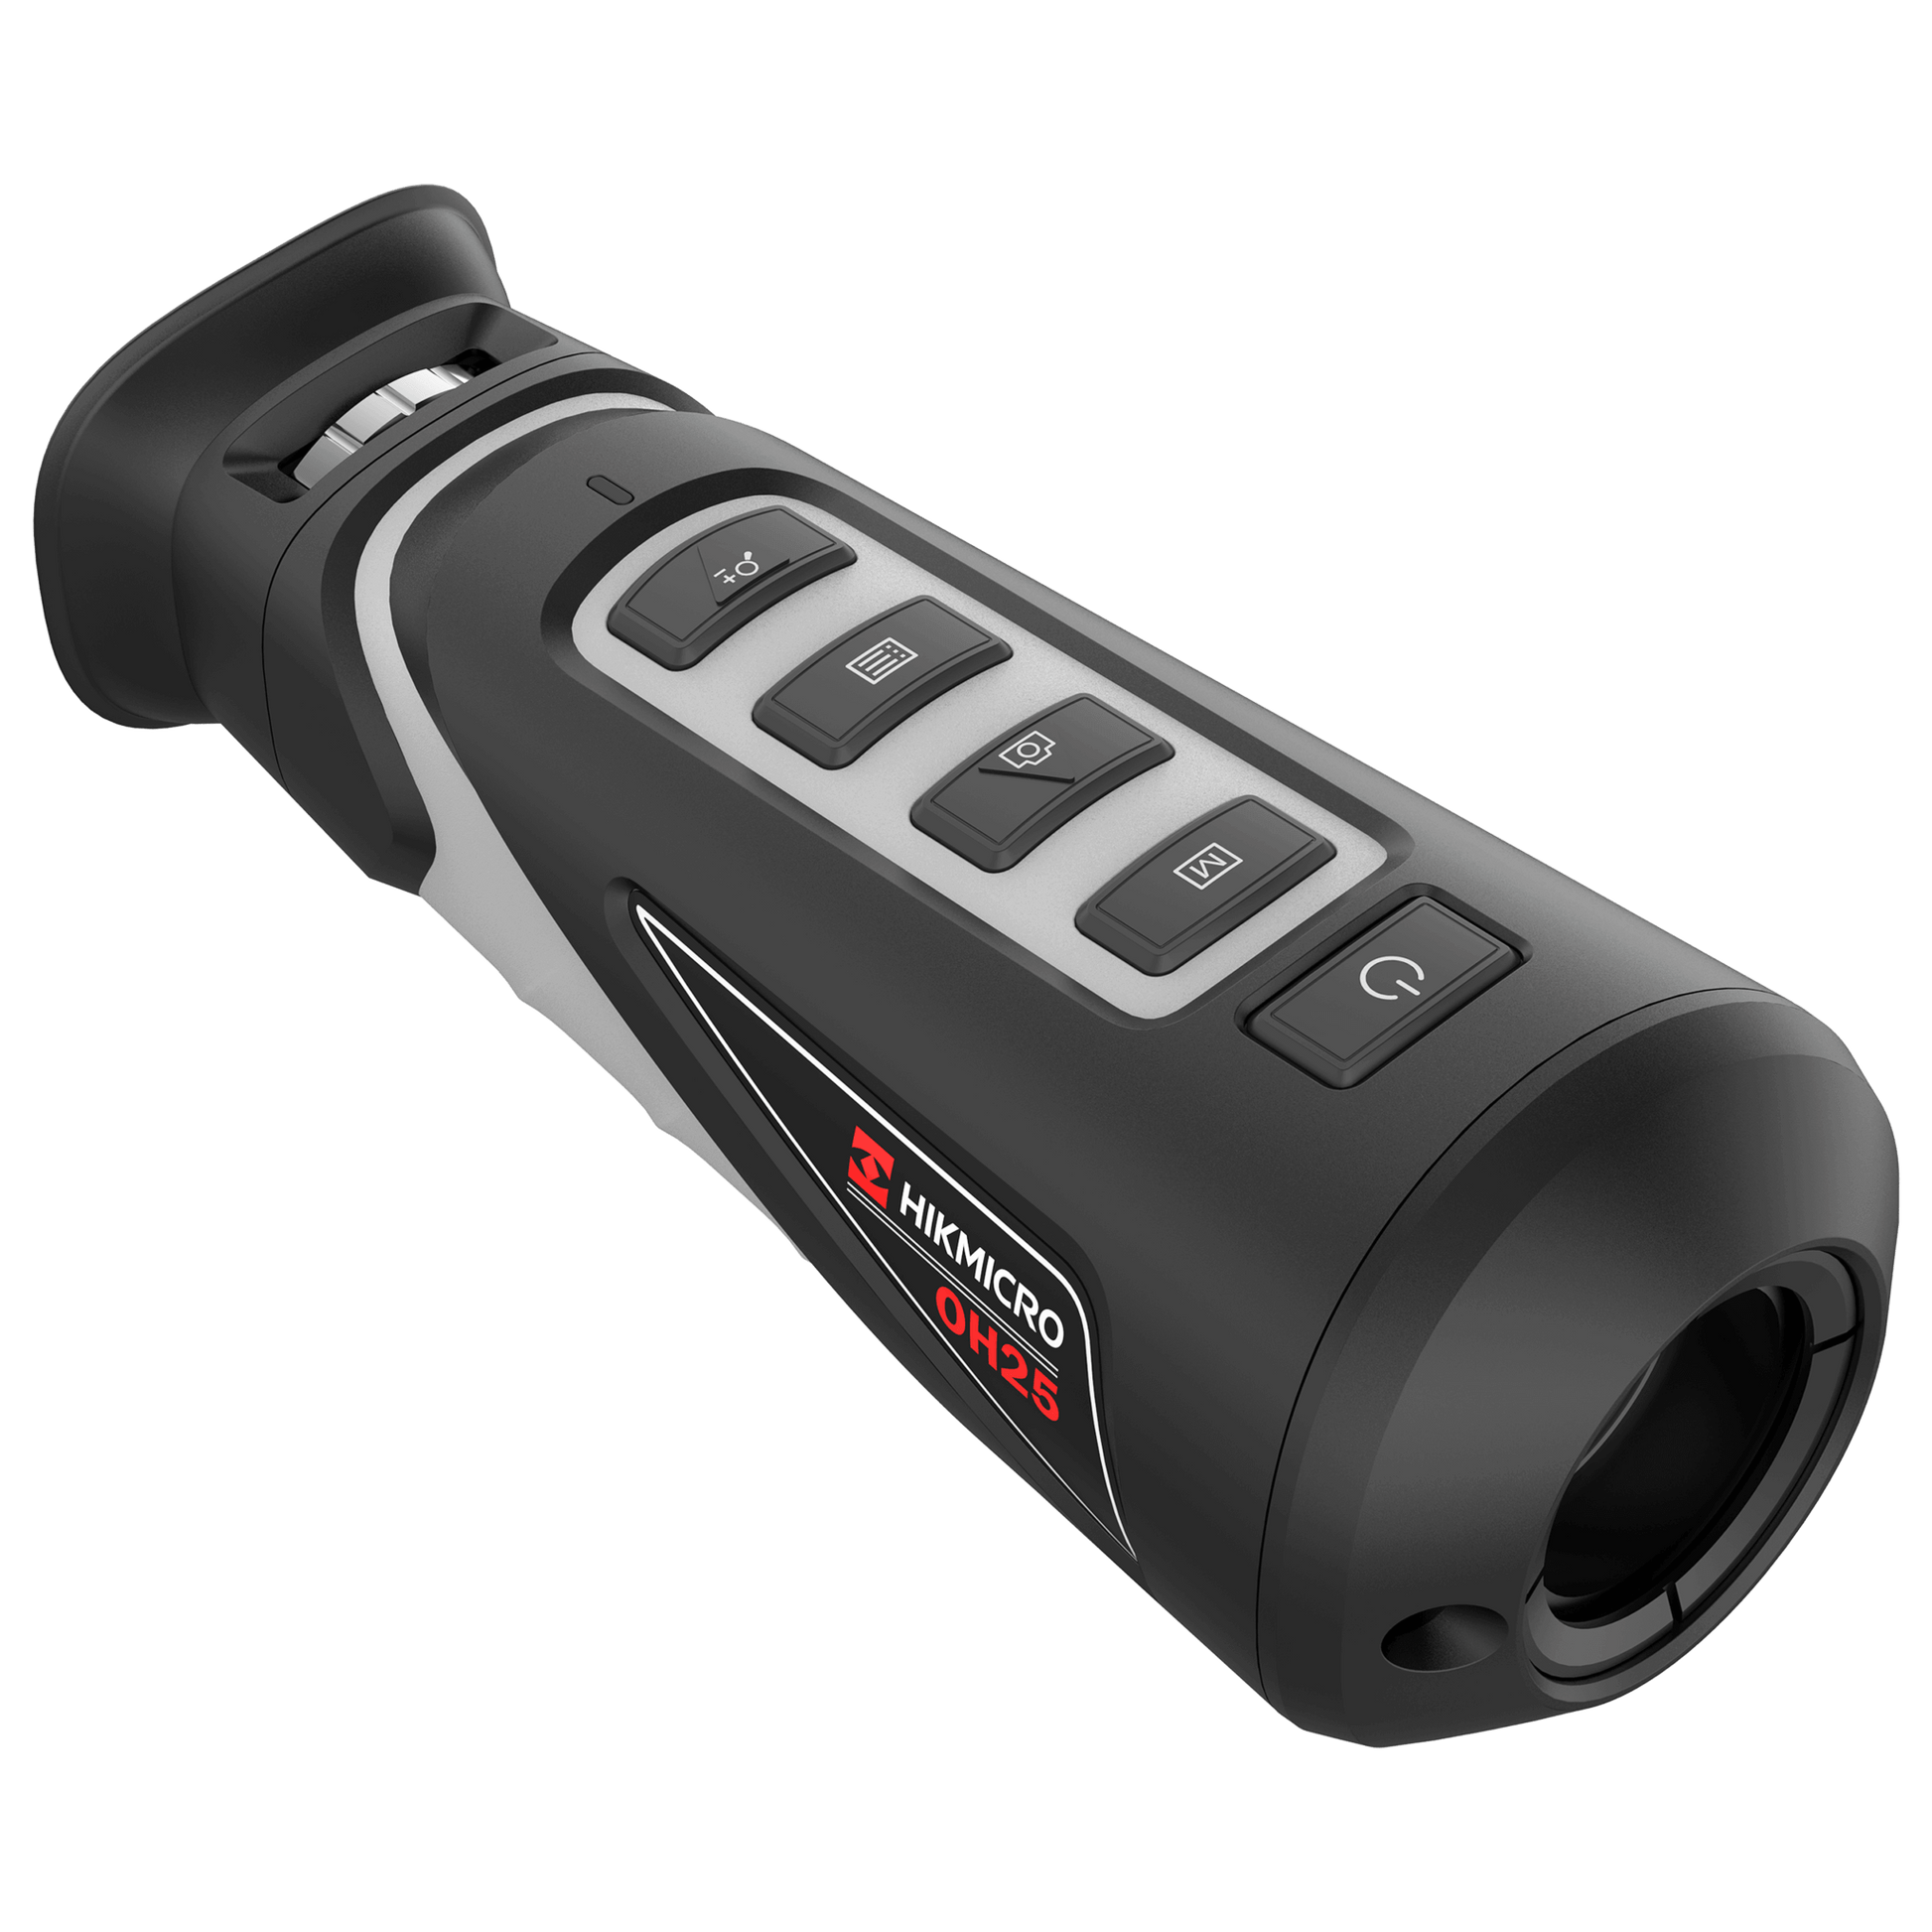 Cape Thermal - The best thermal imaging monoculars for sale - HikMicro OWL OH25 Handheld thermal imaging monocular - Right Side View